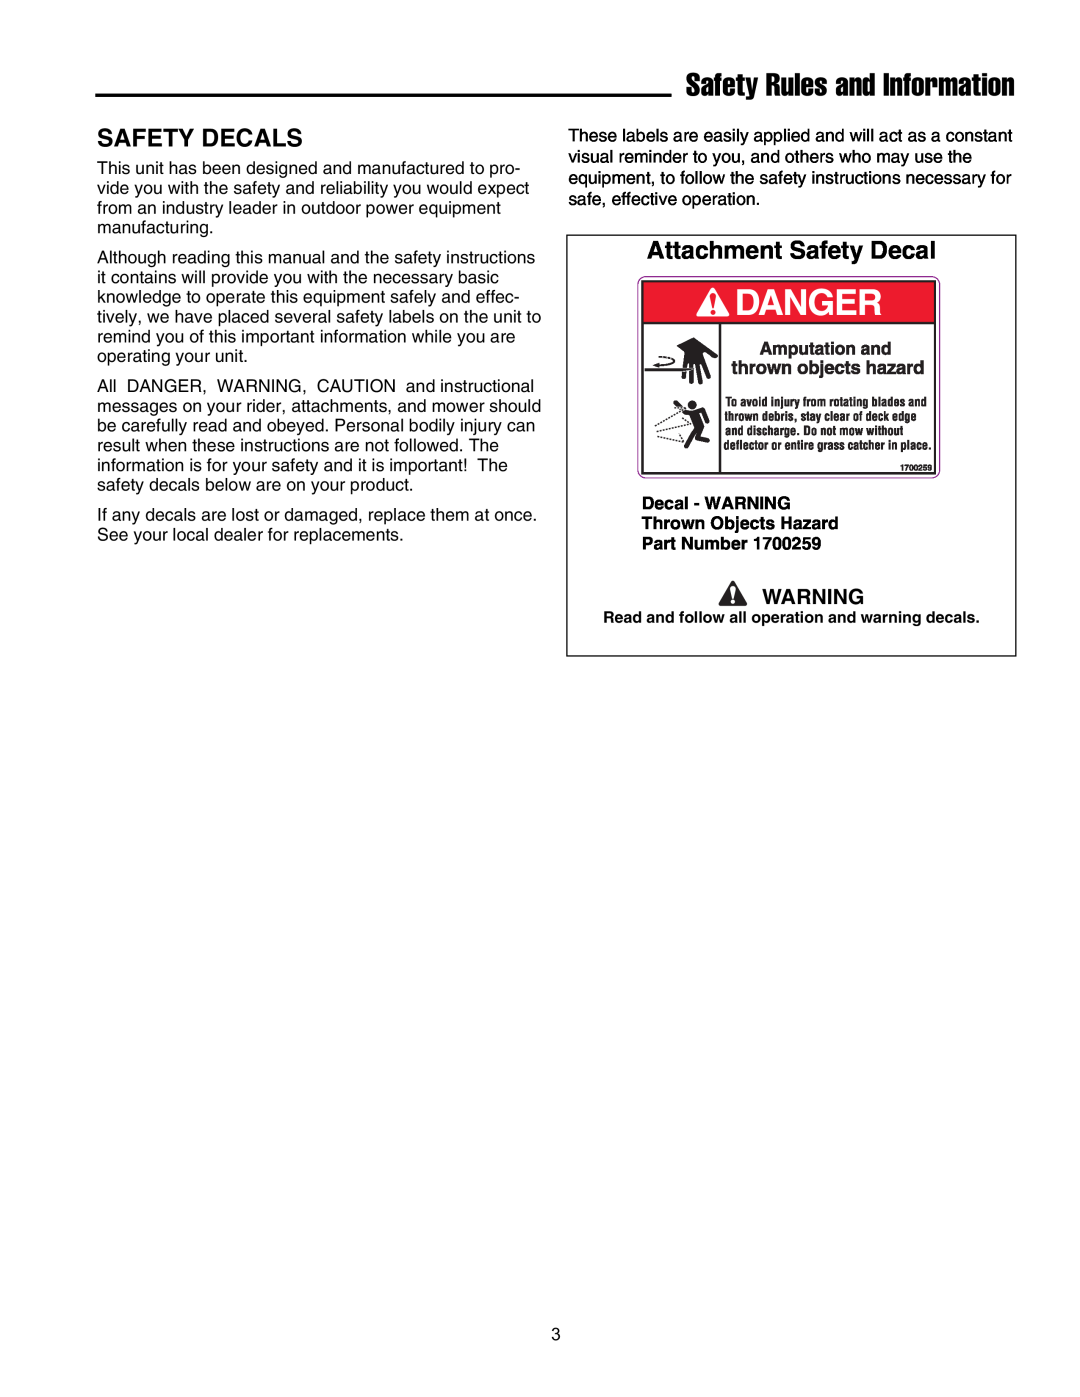 Snapper 1695464 manual Safety Decals, Attachment Safety Decal, Safety Rules and Information 